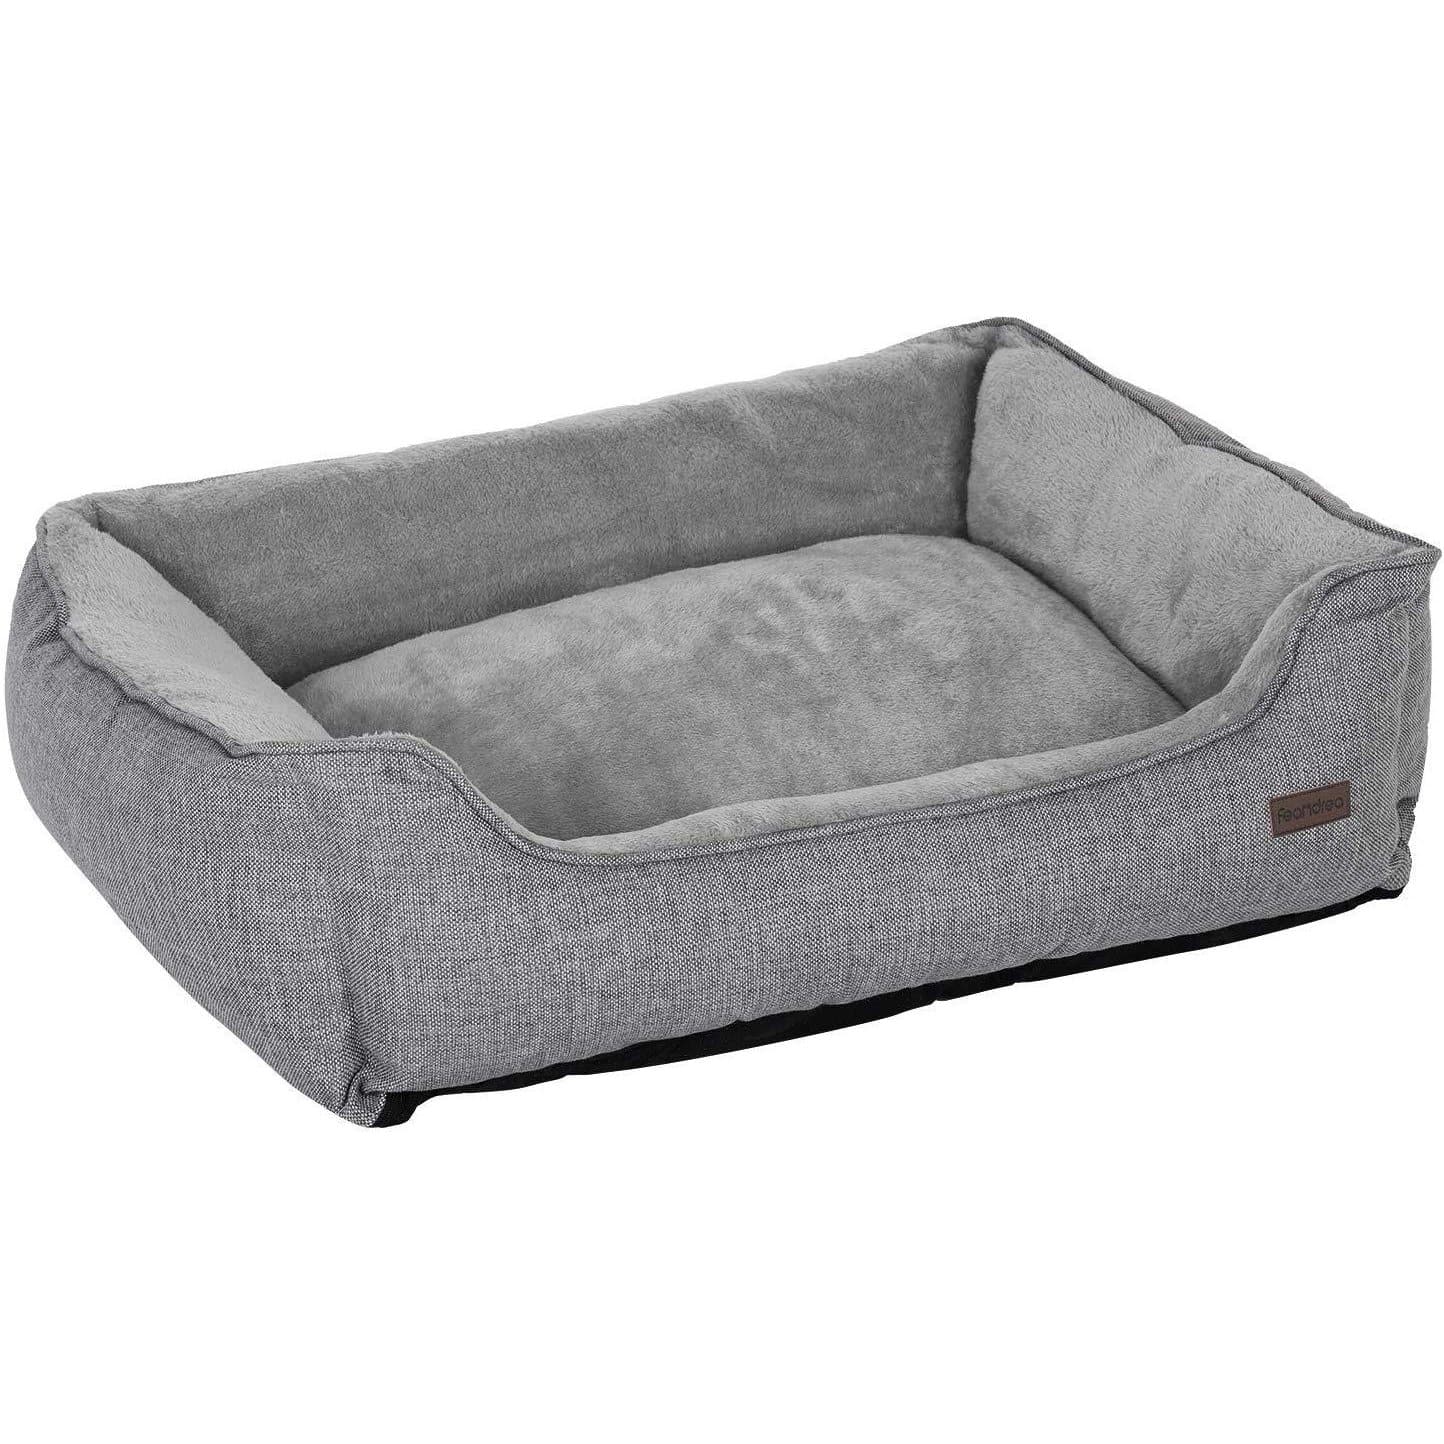 Nancy's XXL Dog Bed Washable - Dog Bed - Removable Cover - Dog Beds